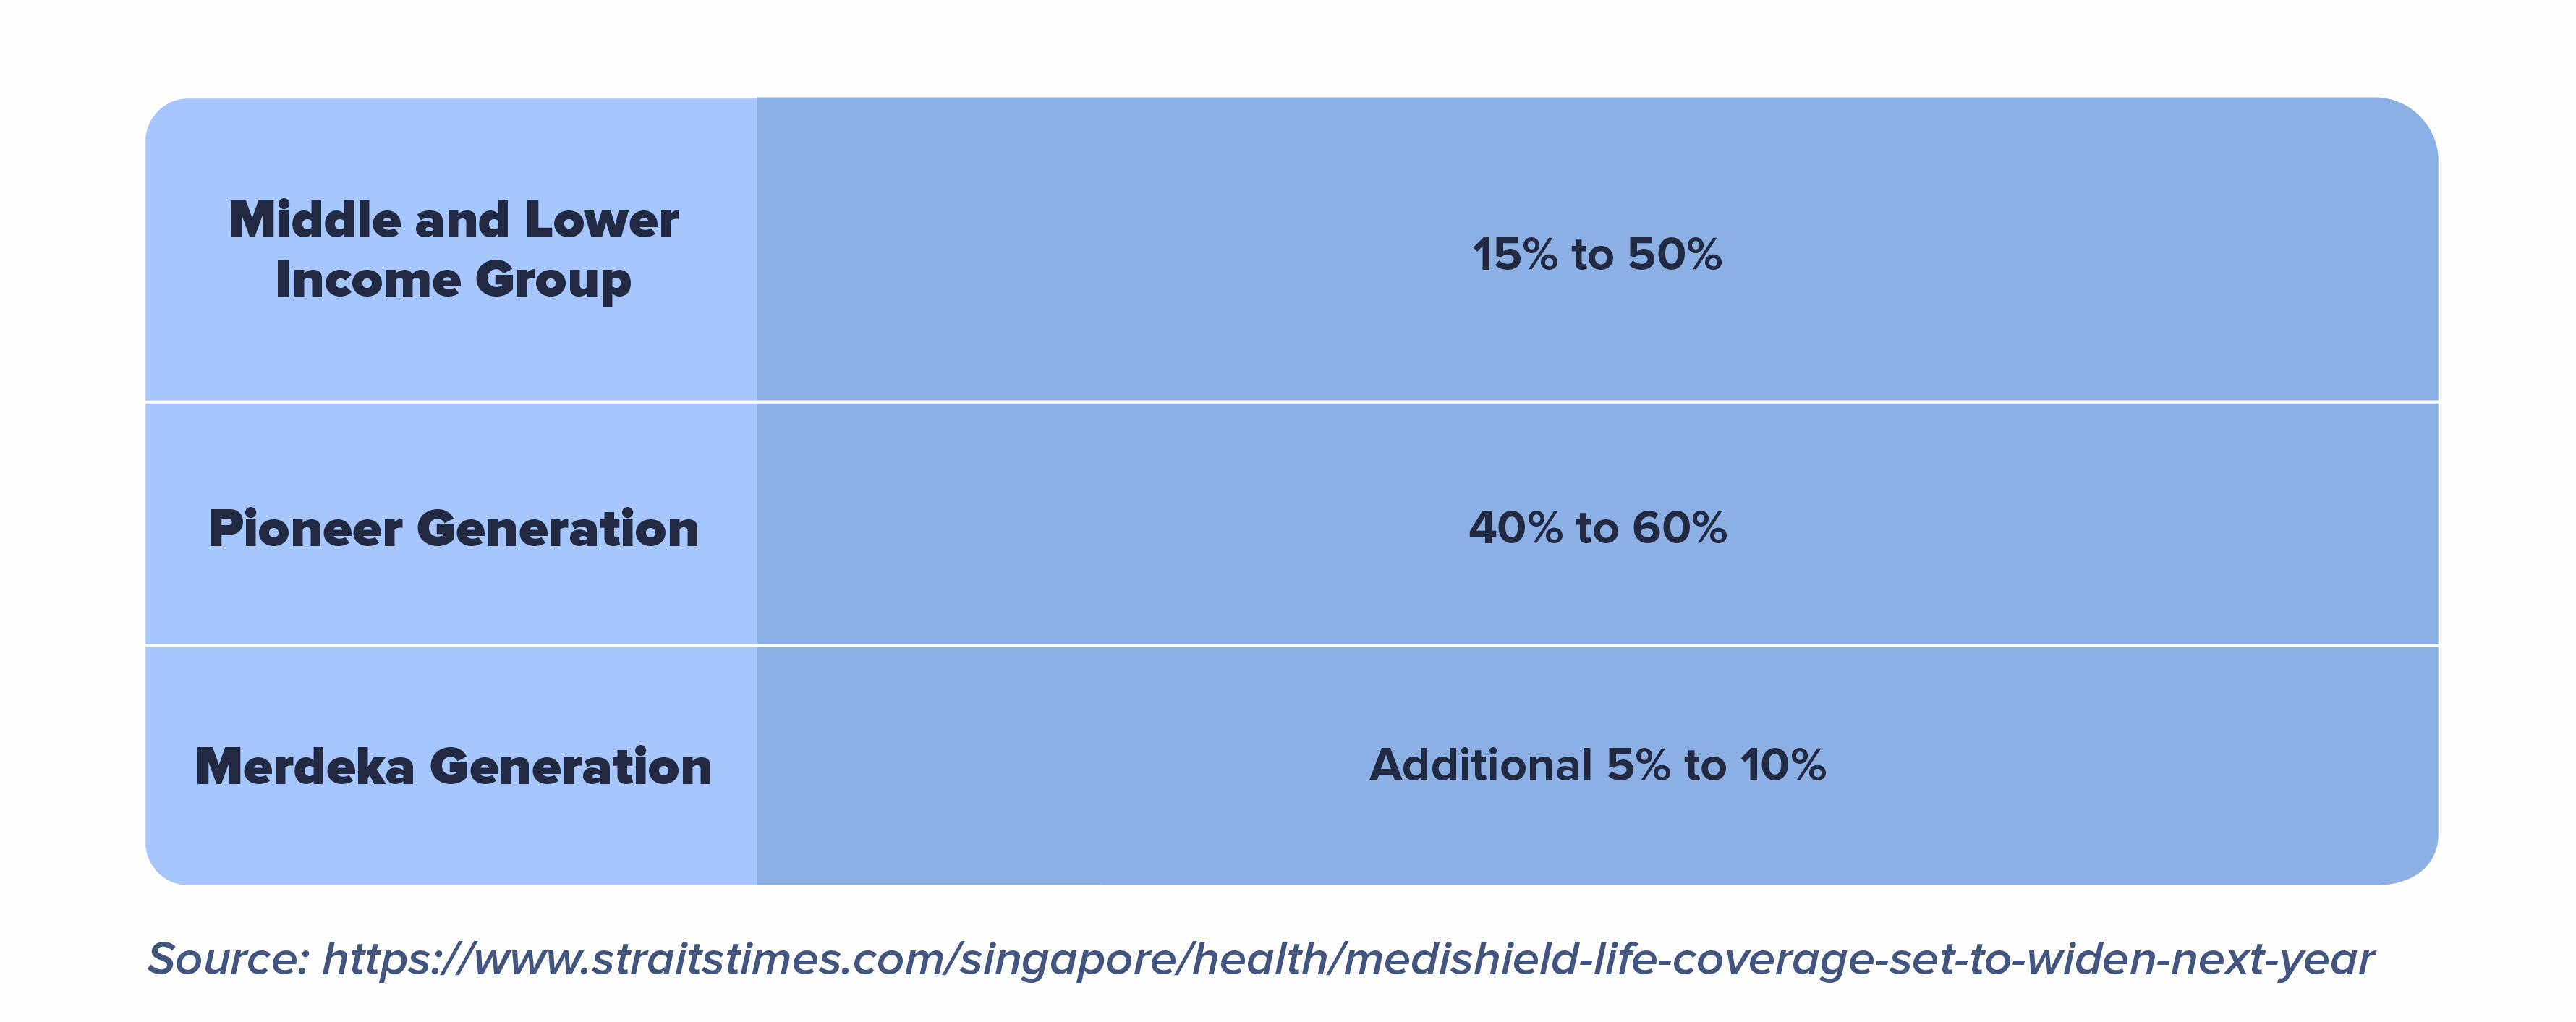 MediShield Life to be enhanced in 2021 – What you should know